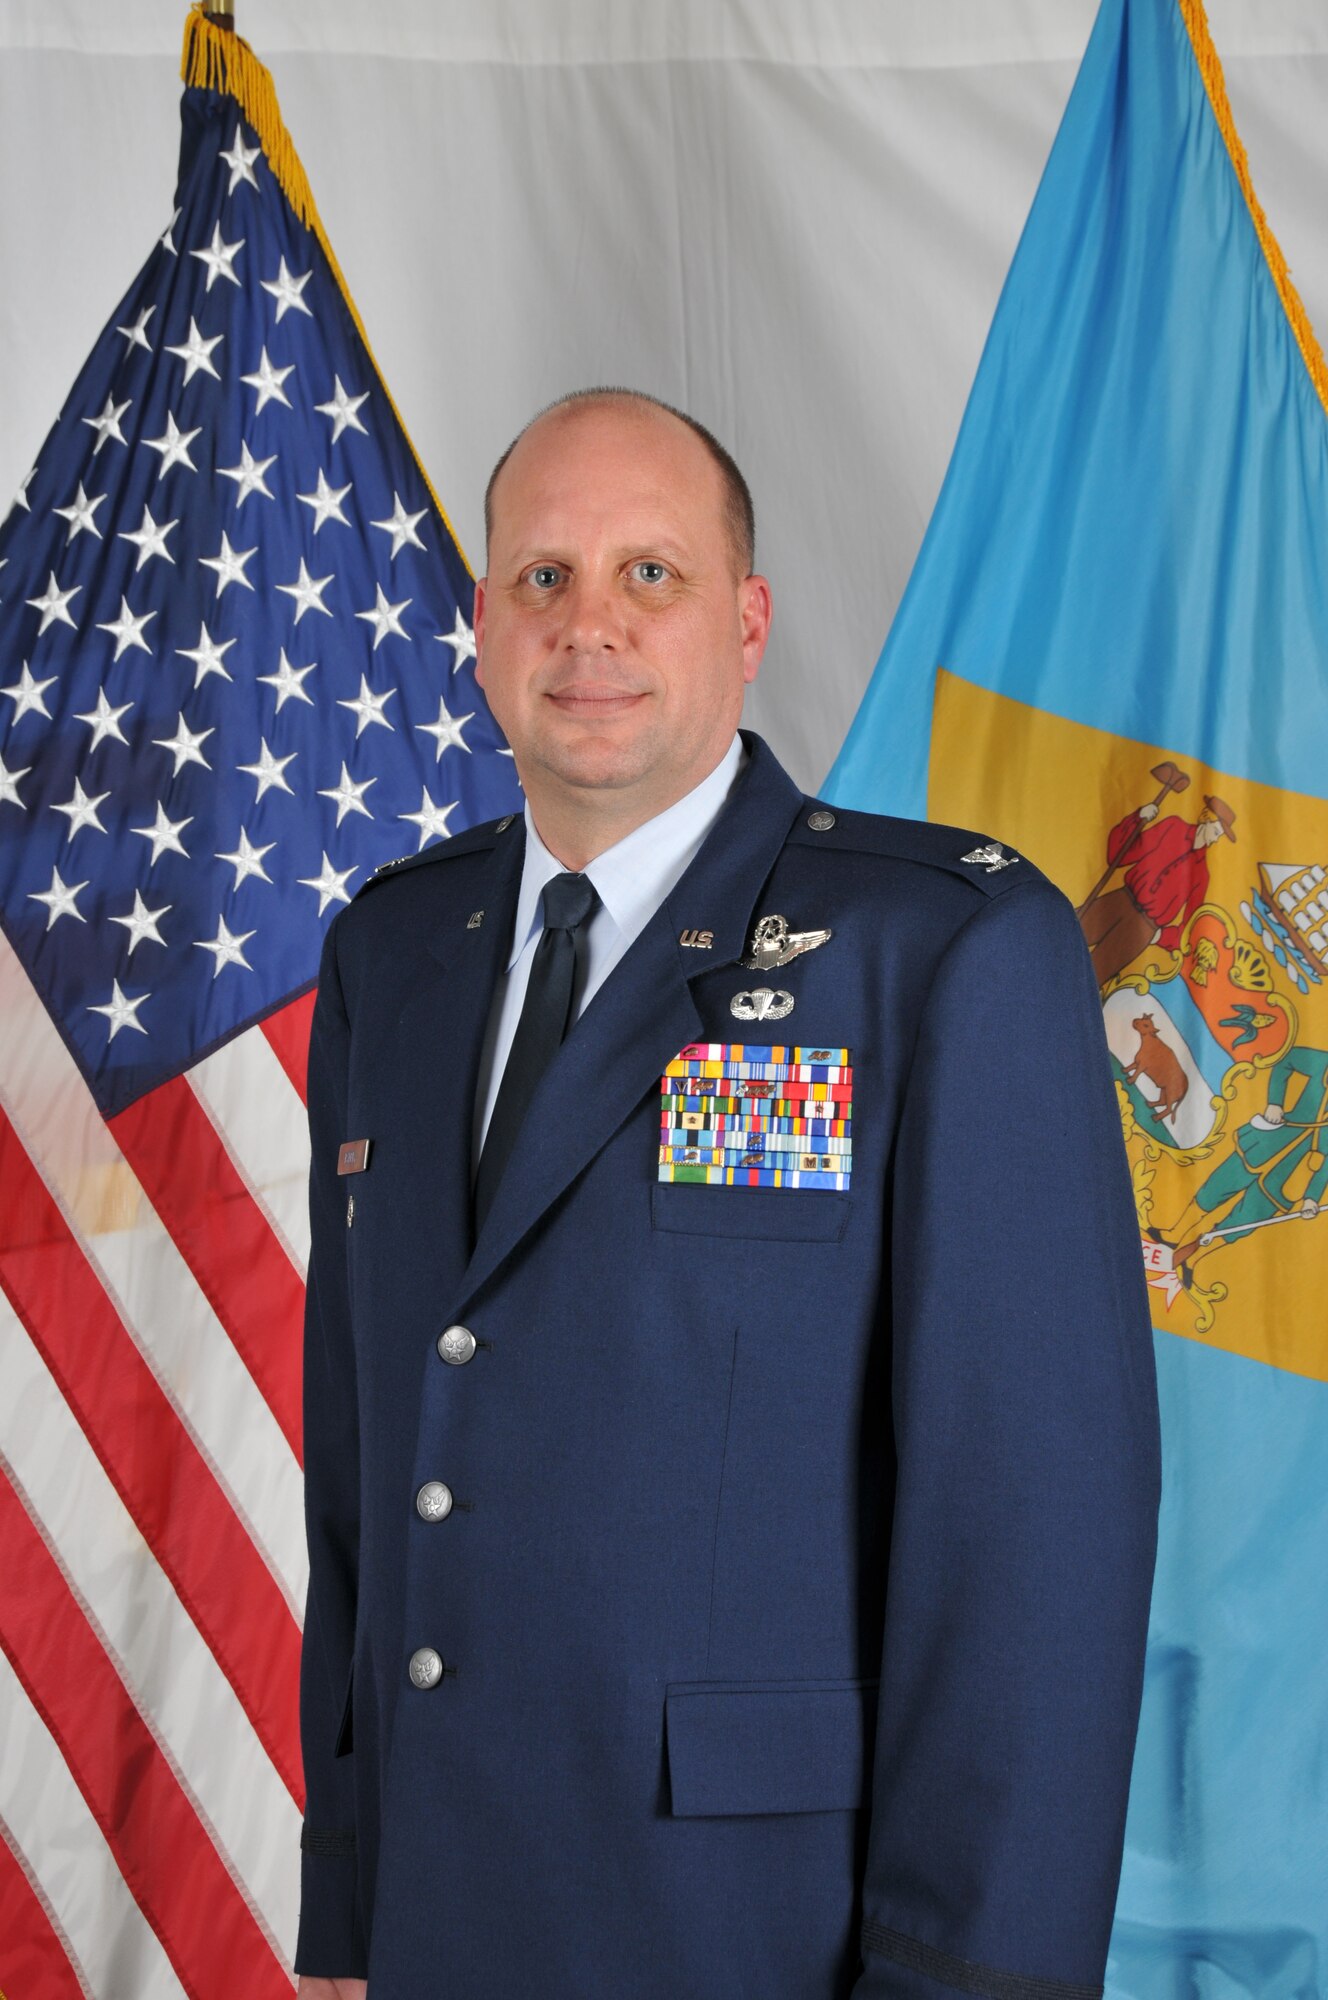 Colonel James D. (Dave) Byerly, vice commander, 166th Airlift Wing, Delaware Air National Guard (U.S. Air National Guard photo by Staff Sgt. Nathan Bright)